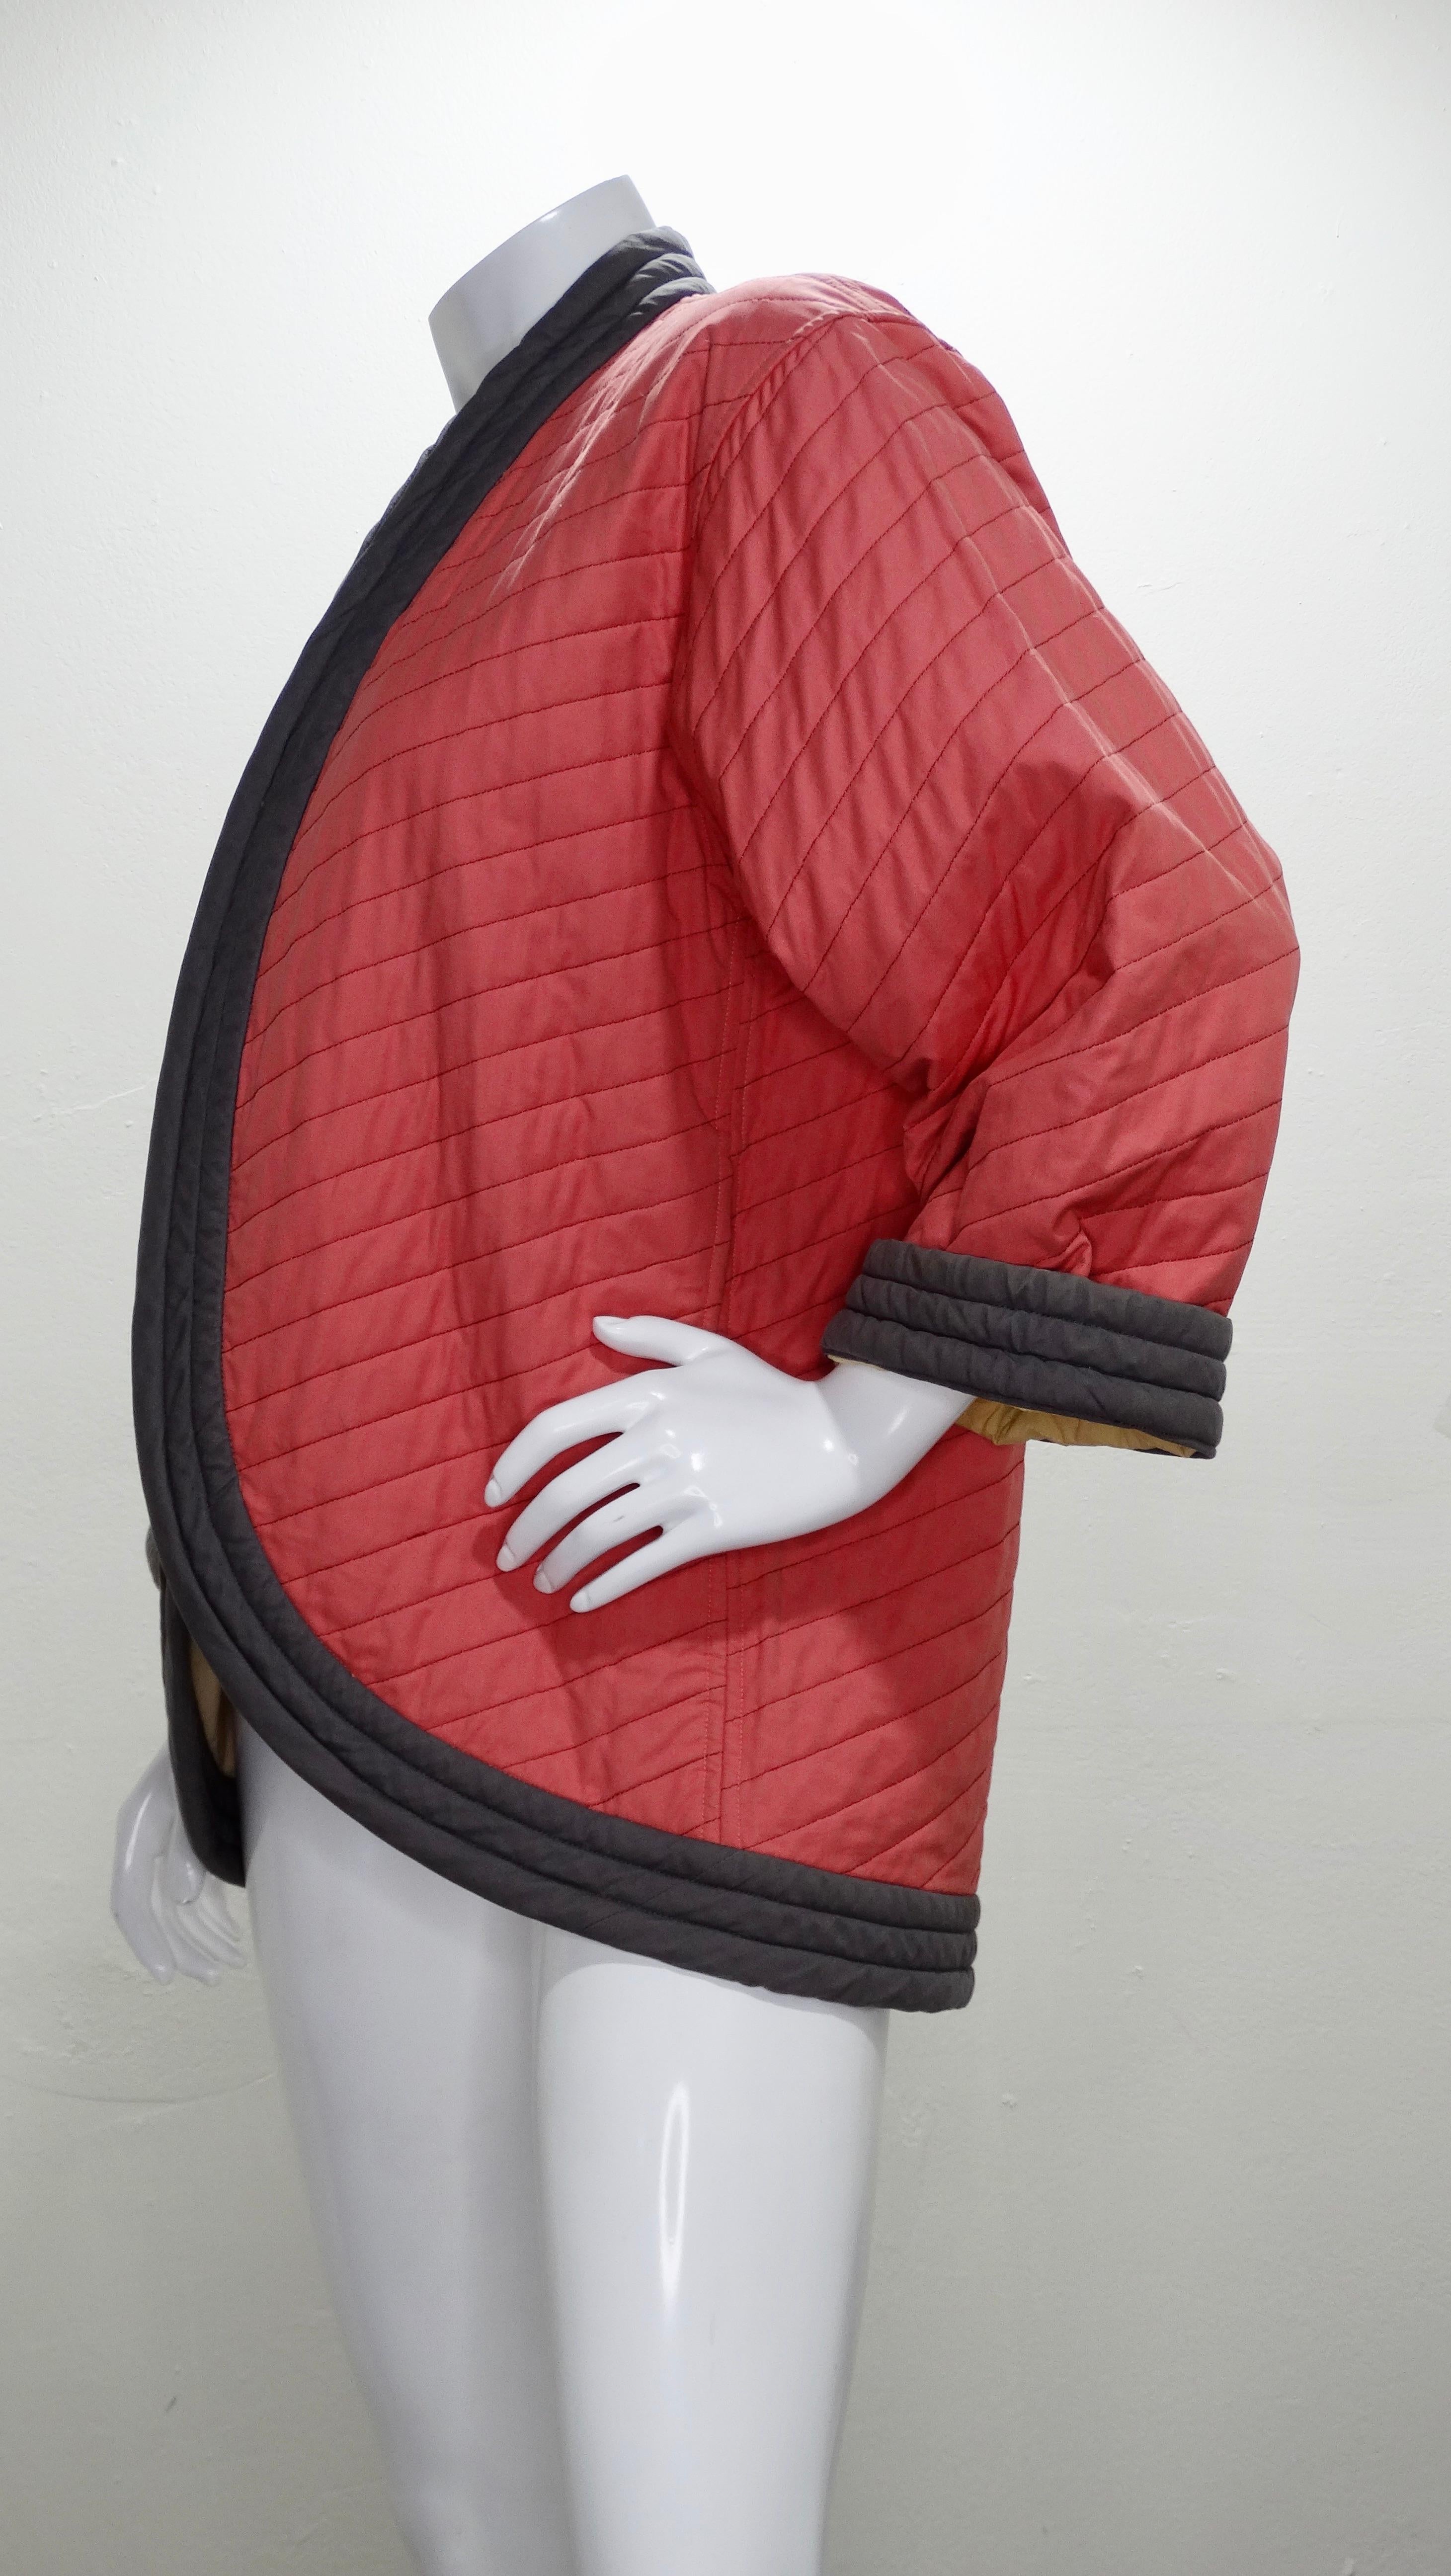 Nobody does it quite like Yves Saint Laurent! Alongside the launch of his legendary fragrance Opium, YSL showcased his China collection during the Fall/Winter runways in 1977. This quilted jacket is made from pink cotton and features a grey trim